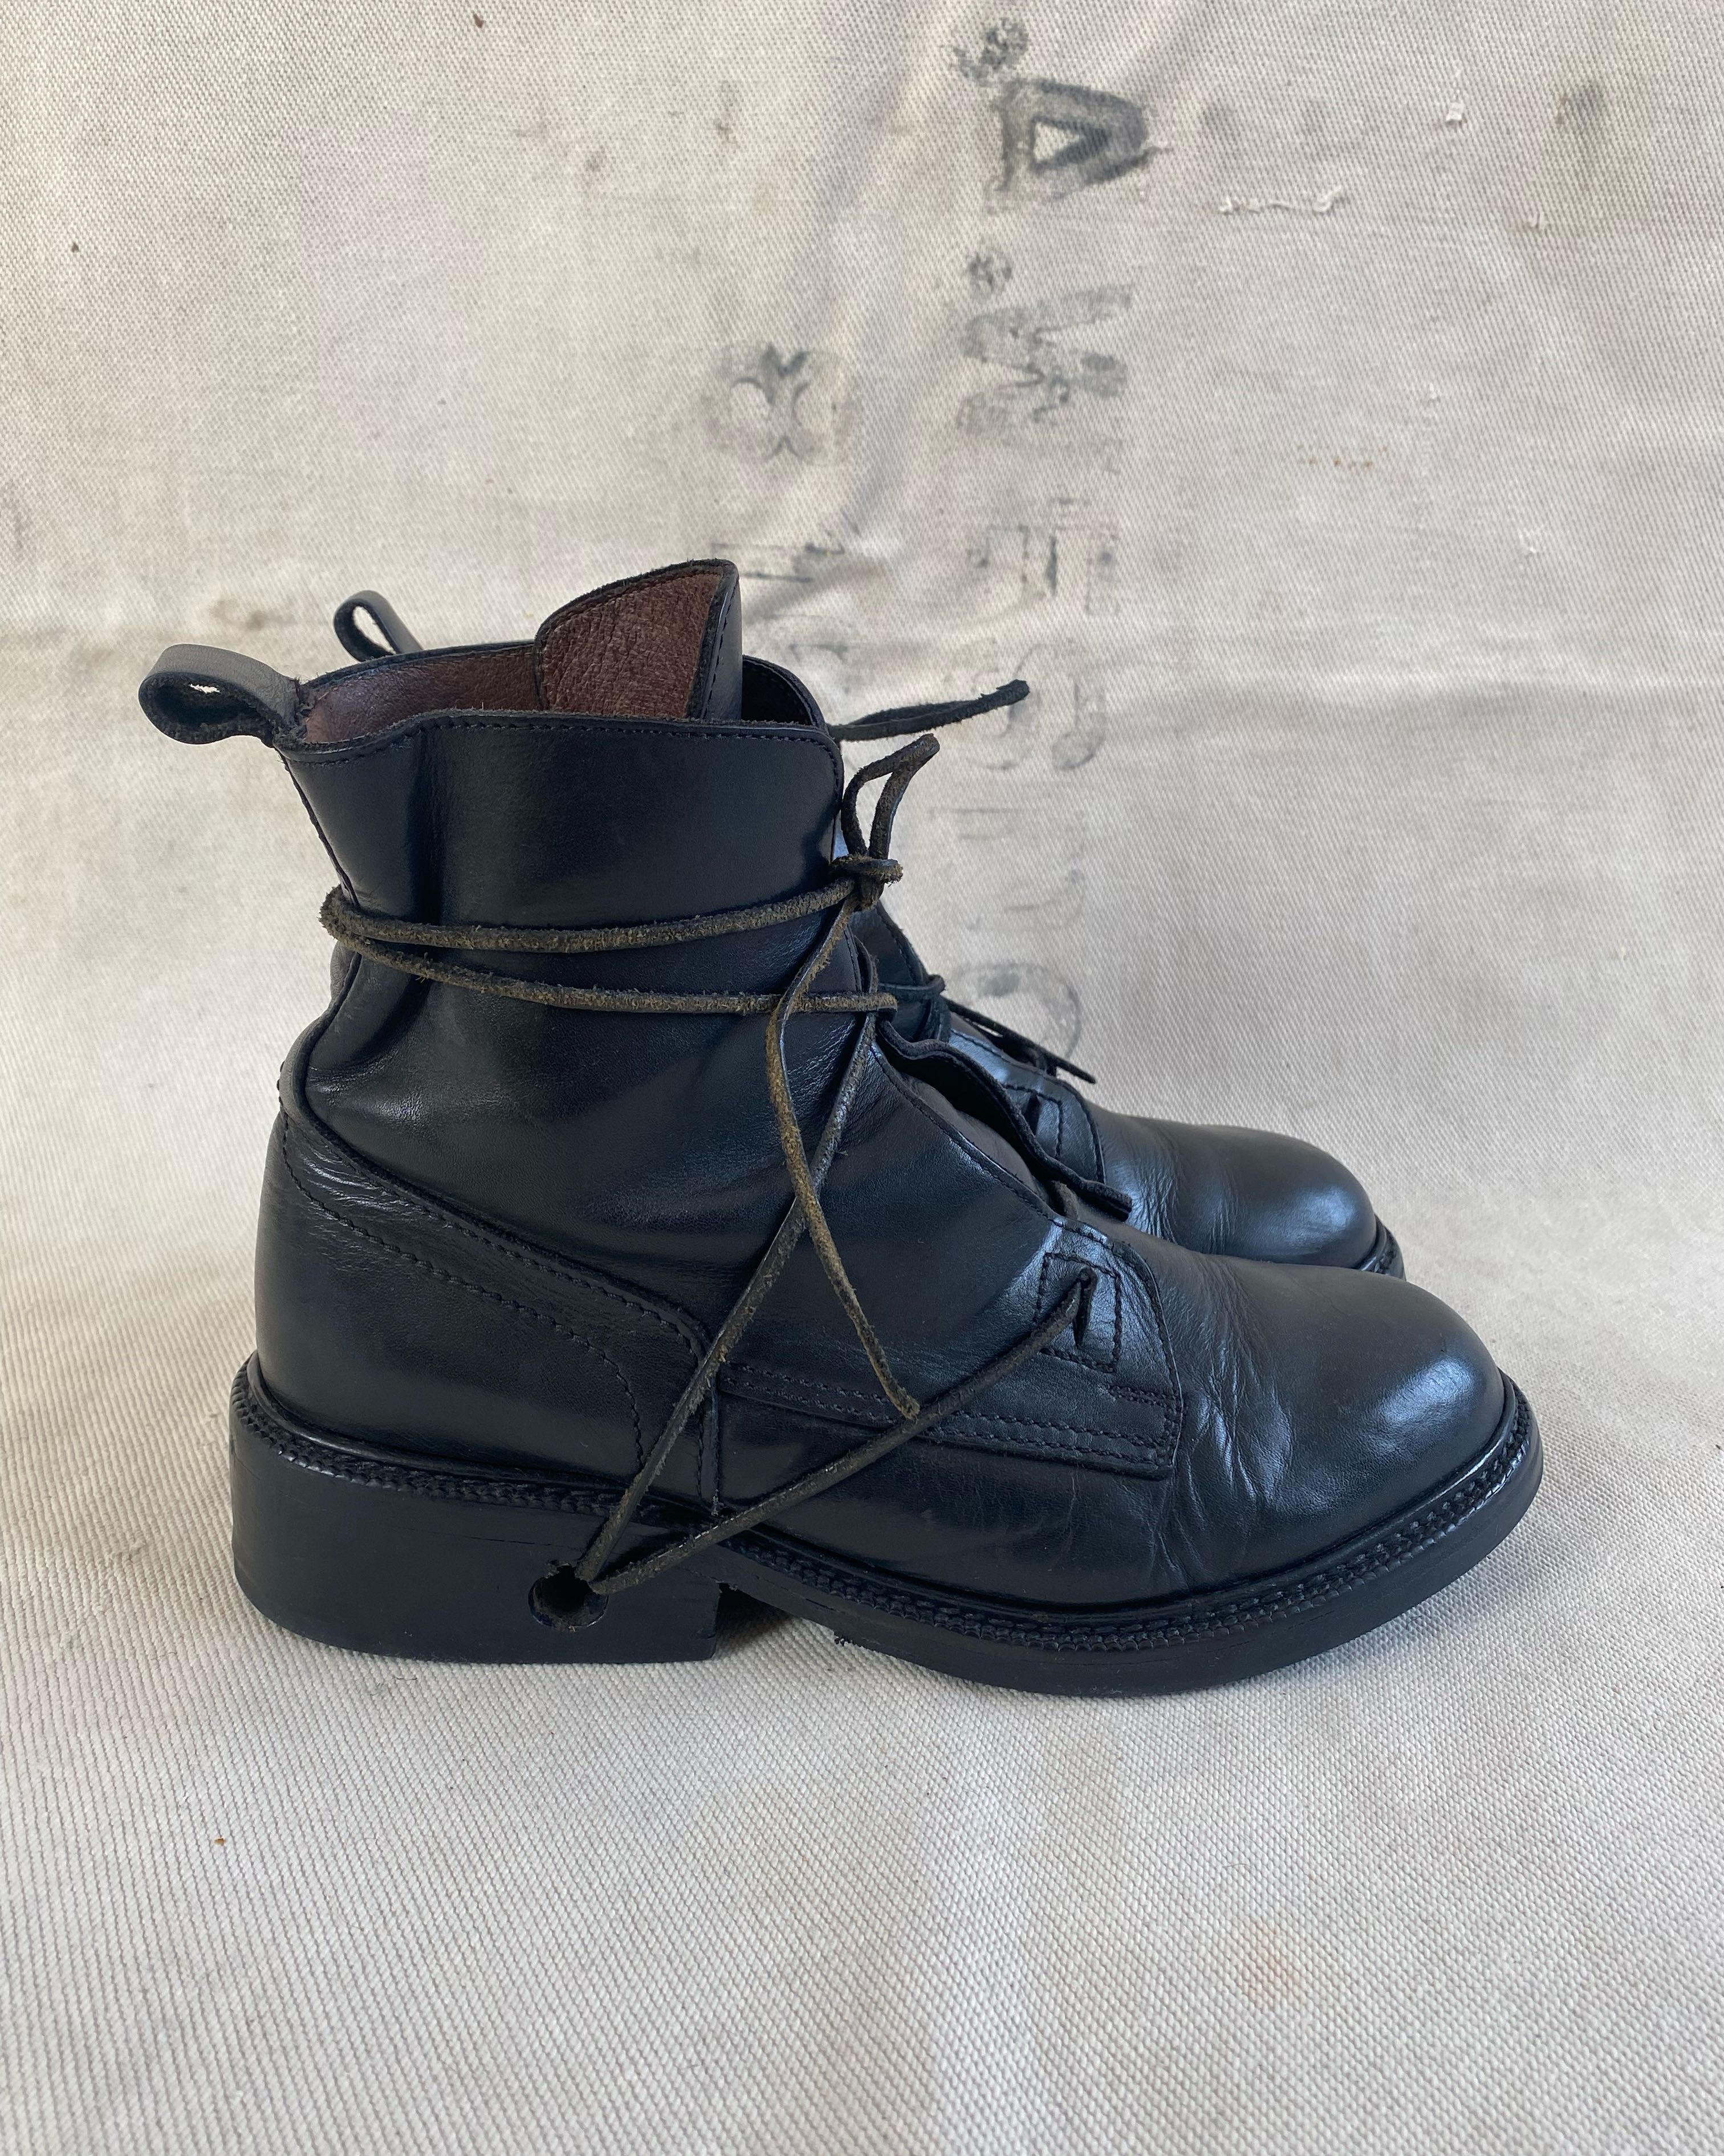 Dirk Bikkembergs 90s Archive Boots - 3